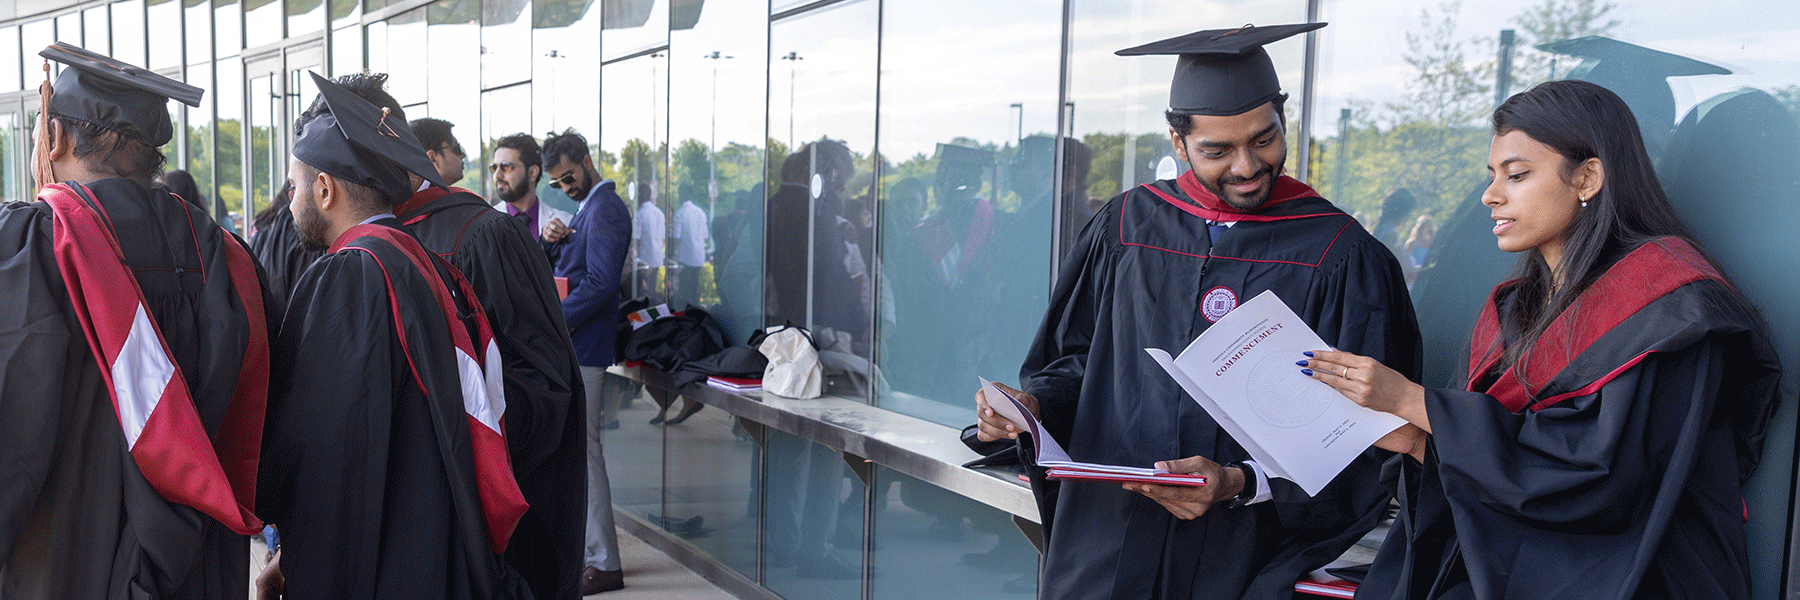 Graduates read the ceremony program while waiting to line up.